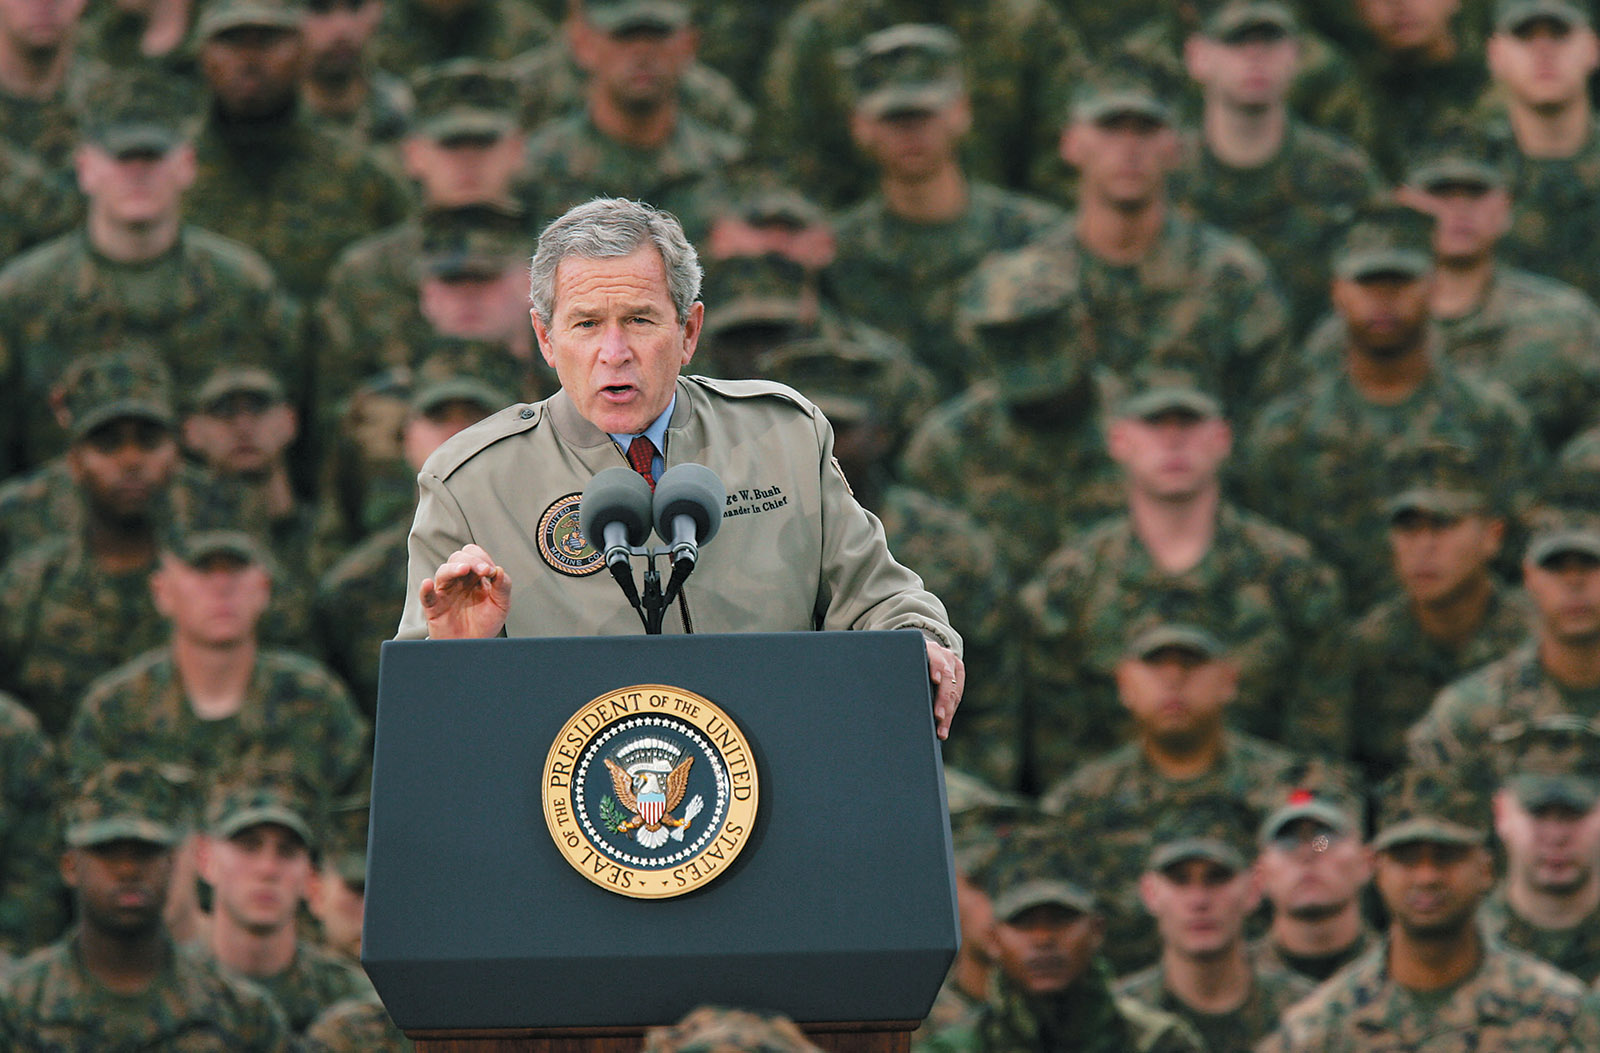 George W. Bush speaking to marines on the sixty-third anniversary of the Pearl Harbor attack, 2004